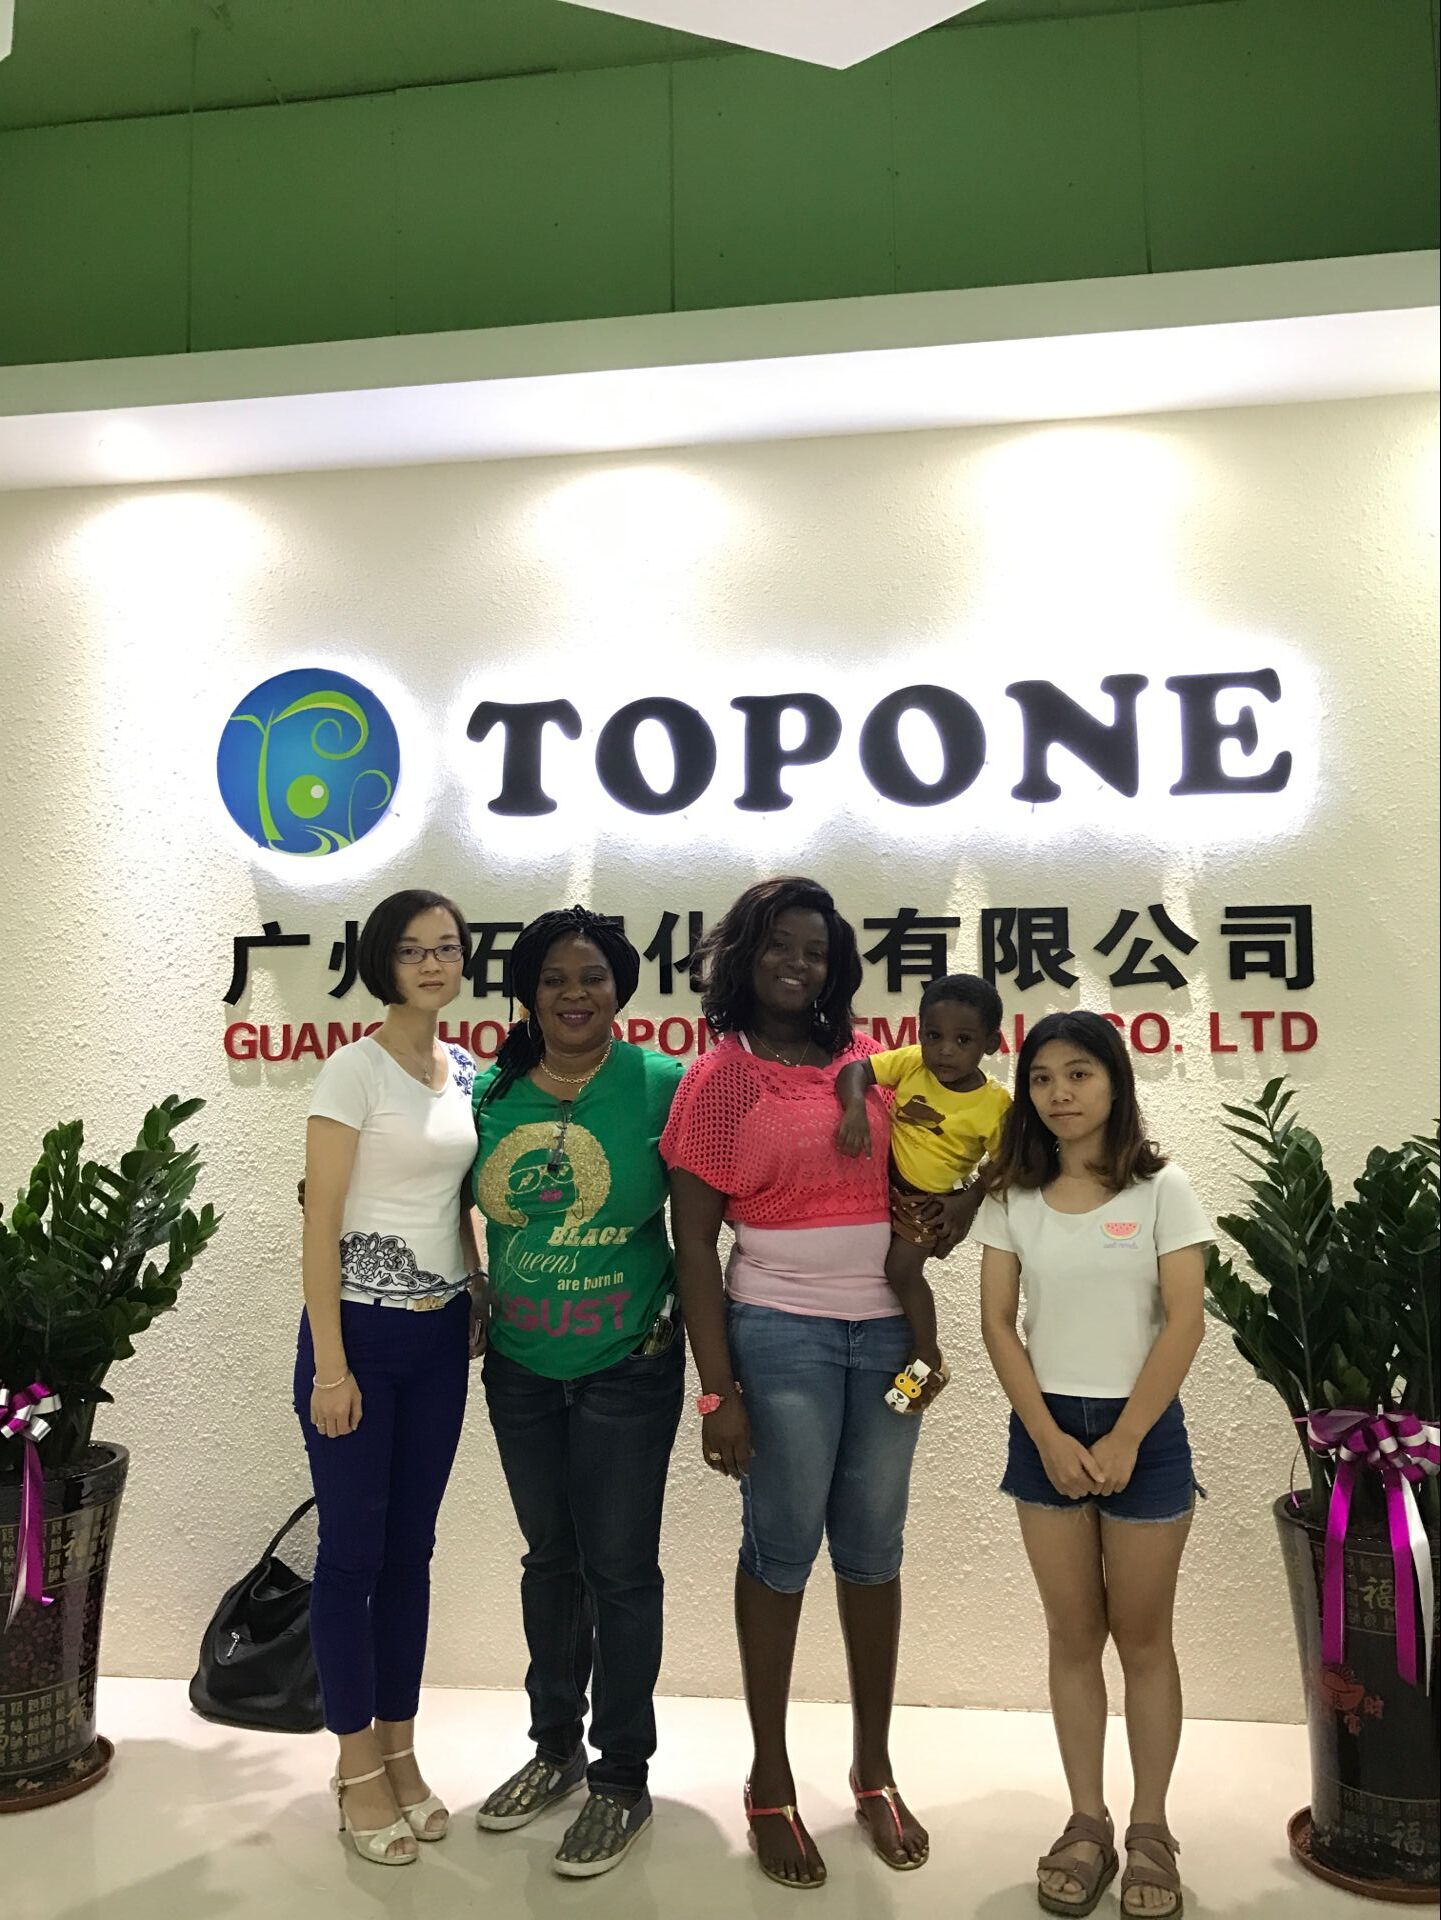 Welcome Clients From Ghana Visit Topone Company ---TOPONE NEWS